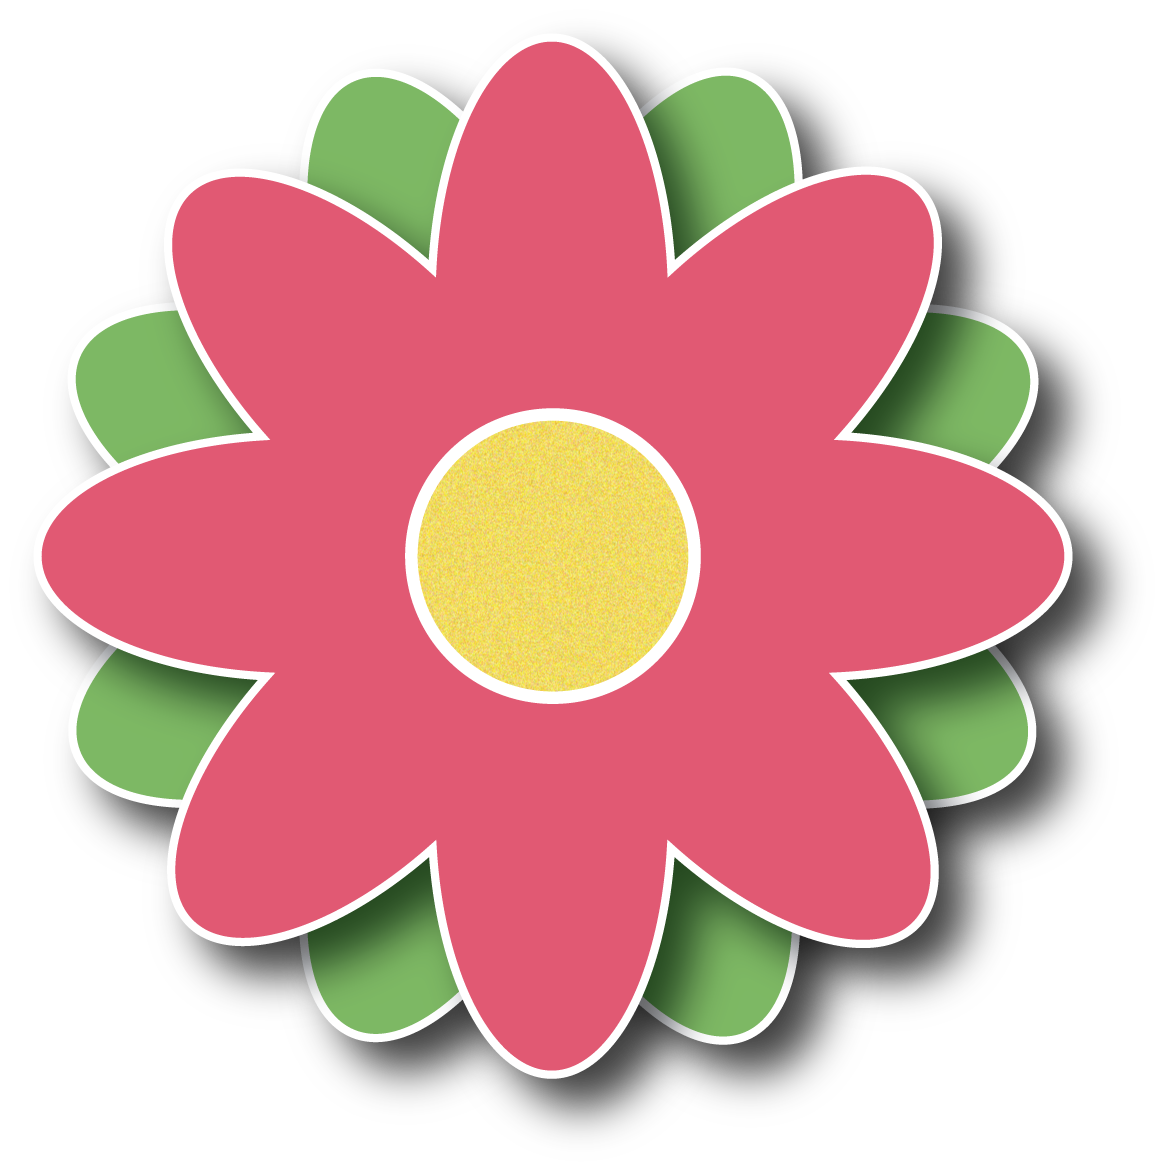 Spring flower spring animated clipart free clipart image #7955